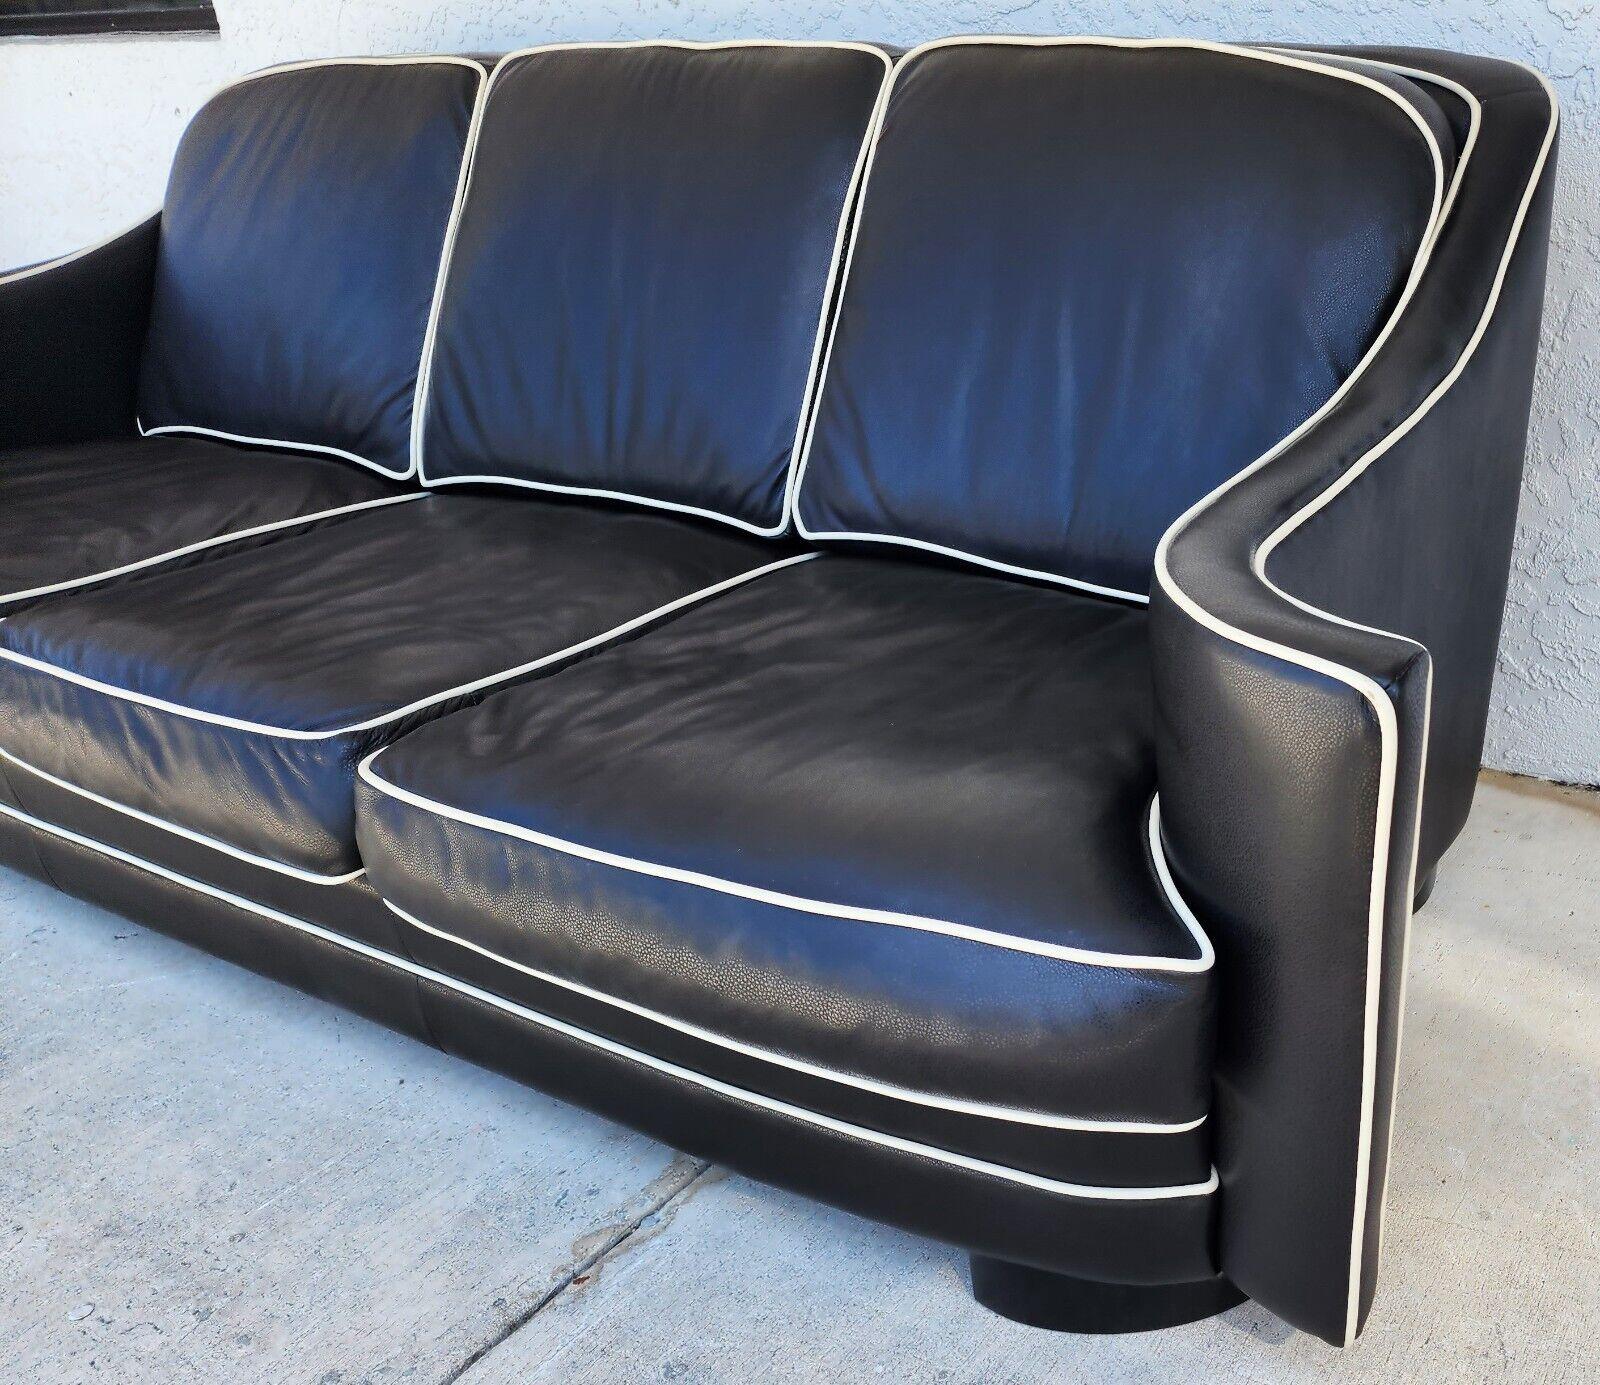 For FULL item description click on CONTINUE READING at the bottom of this page.

Offering One Of Our Recent Palm Beach Estate Fine Furniture Acquisitions Of A
Contemporary Top Grade Leather Sofa by of Elite Leather Los Angeles
Very comfortable